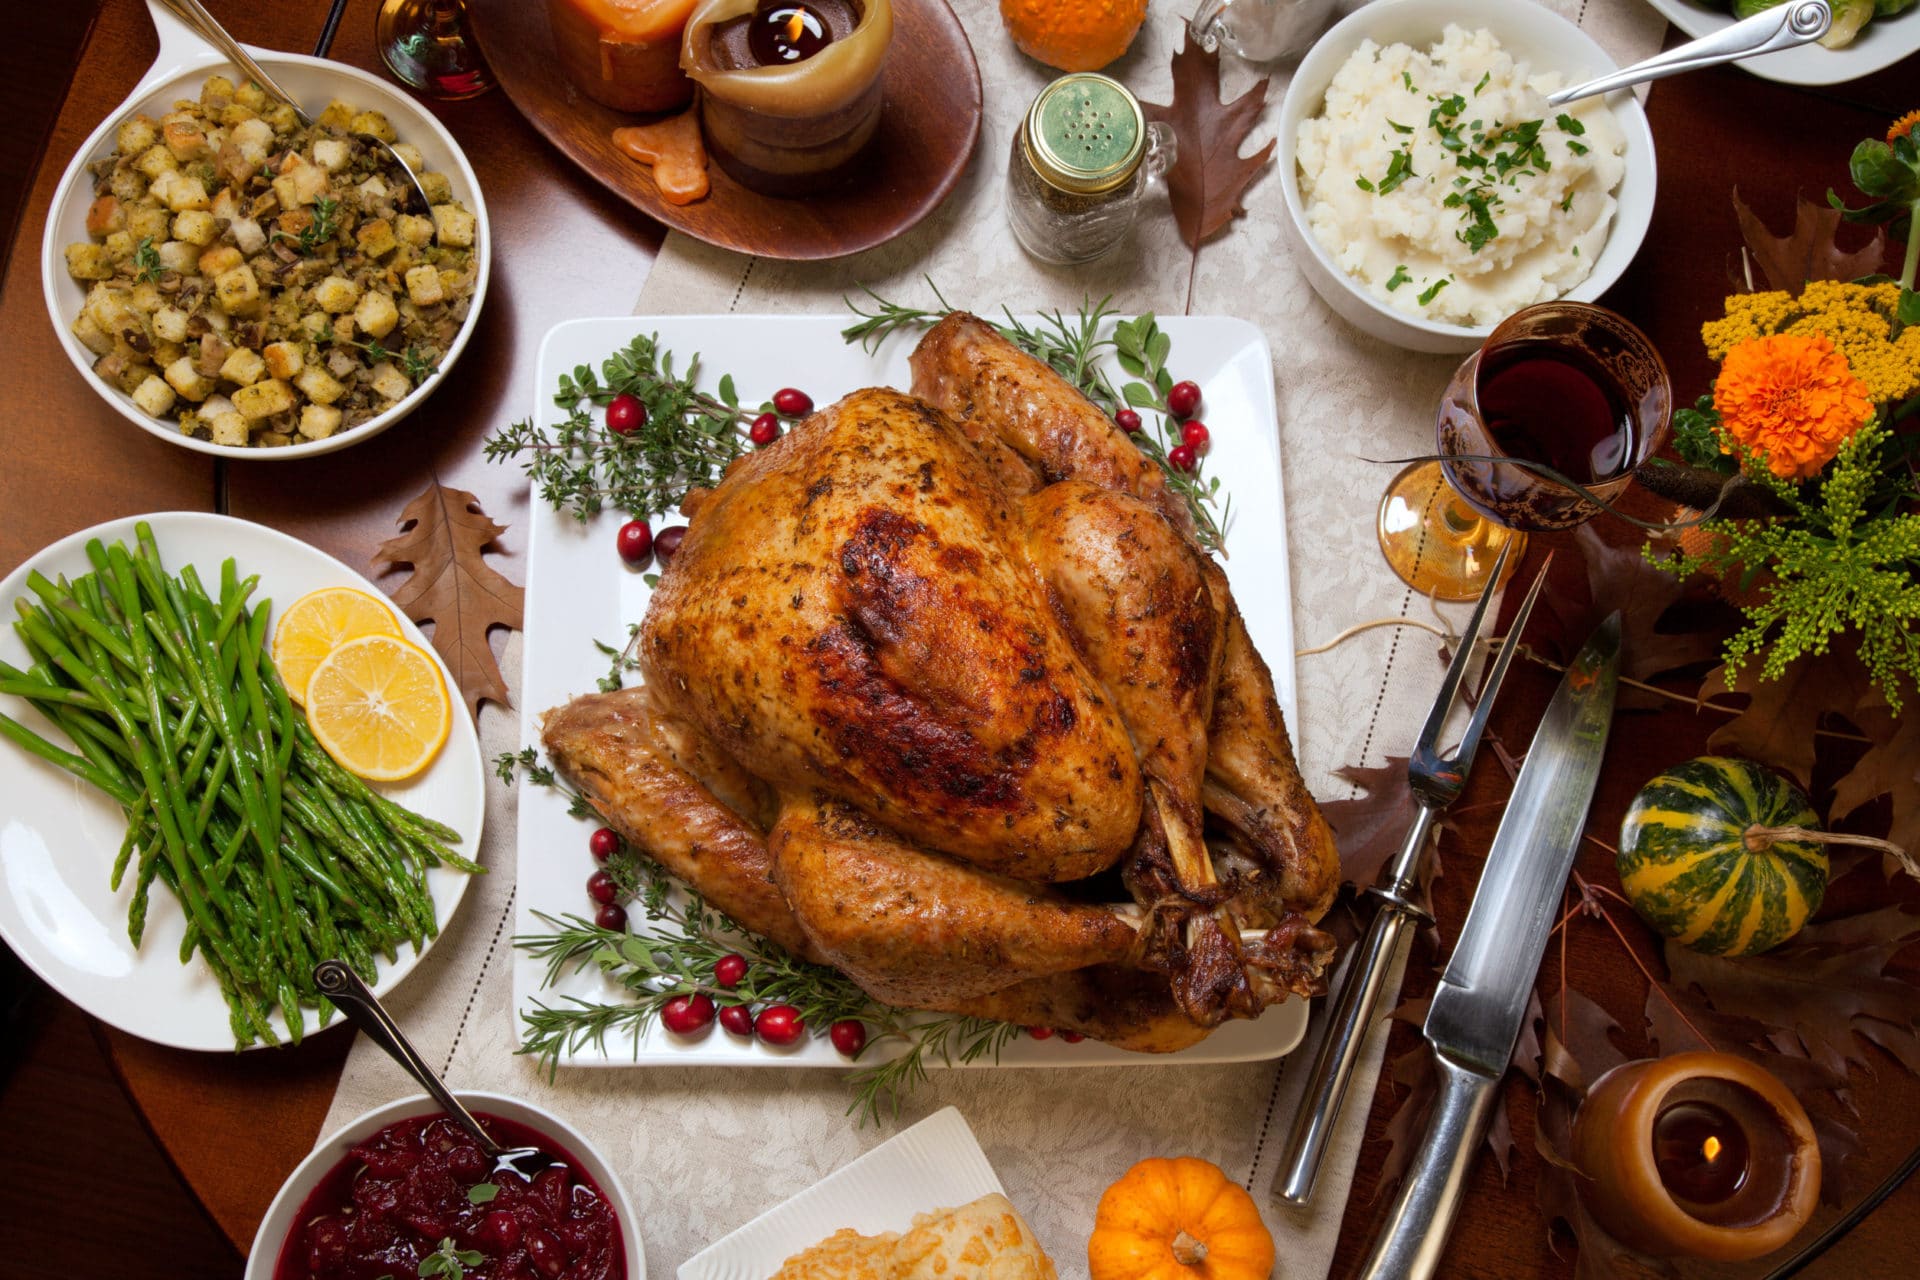 Can You Sue For NY Thanksgiving Food Poisoning?